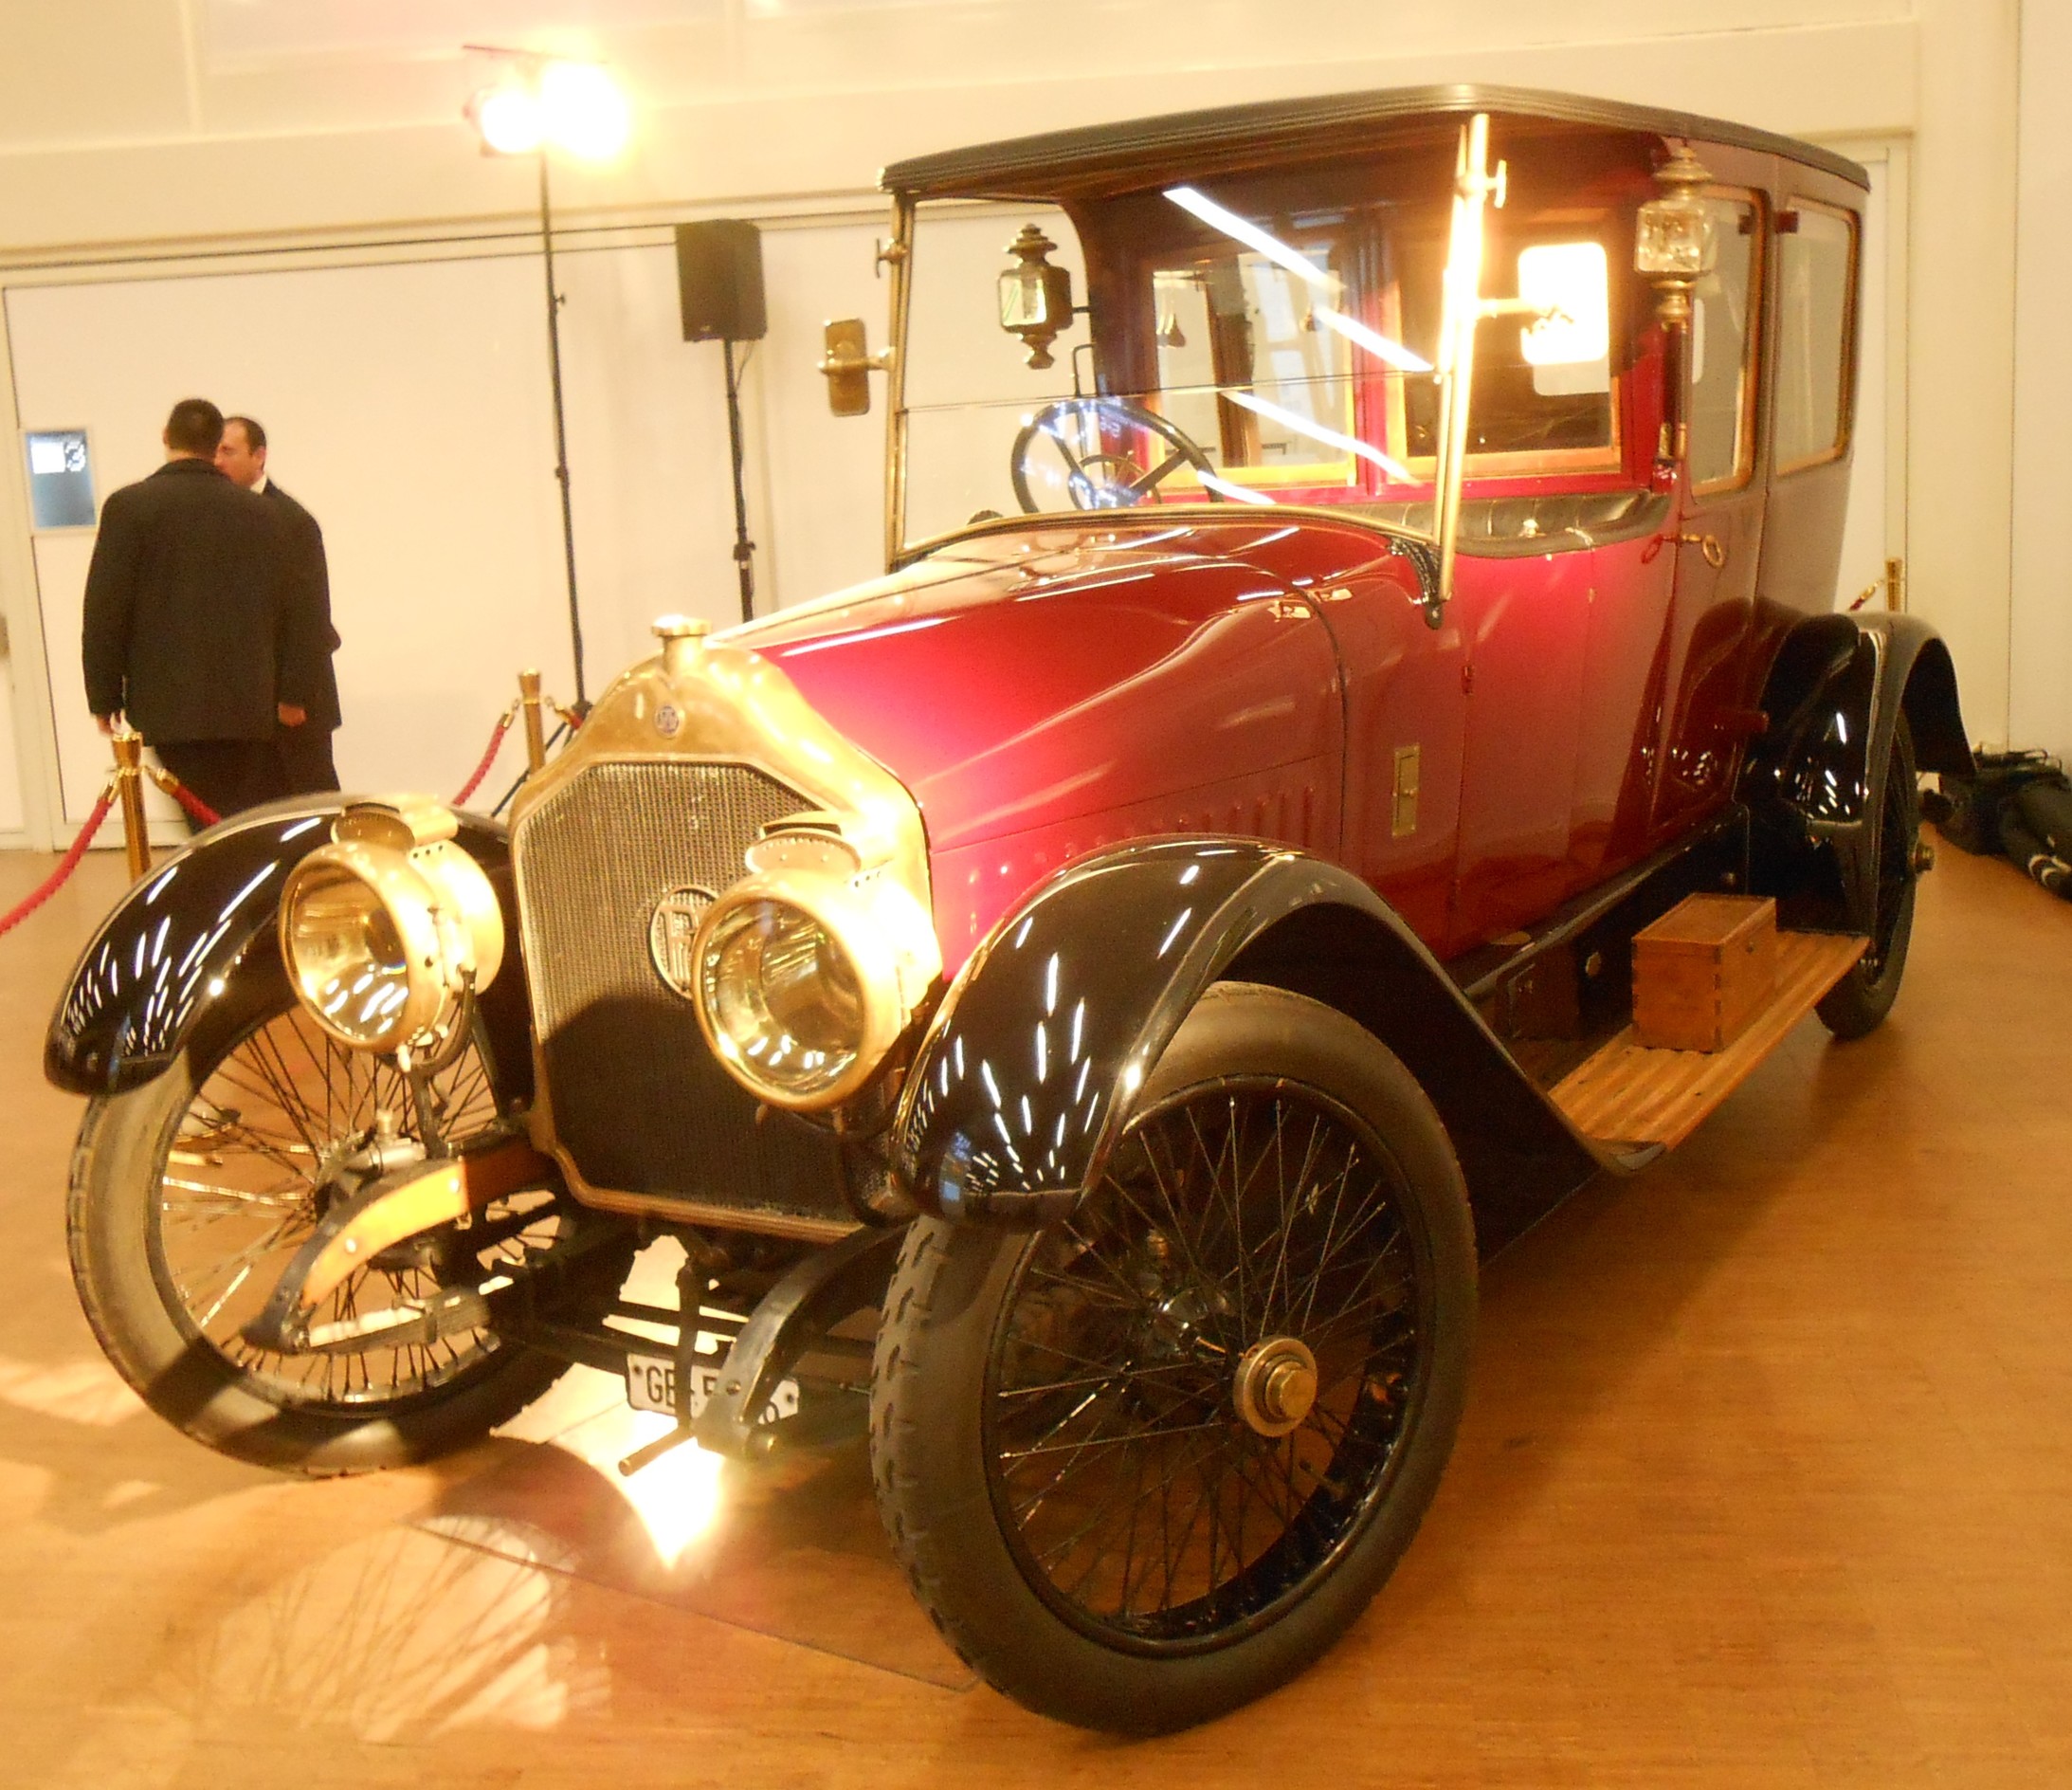 Pic-Pic , Jahrgang 1914 , am Auto-Salon in Genf. Bild: André Pfenninger